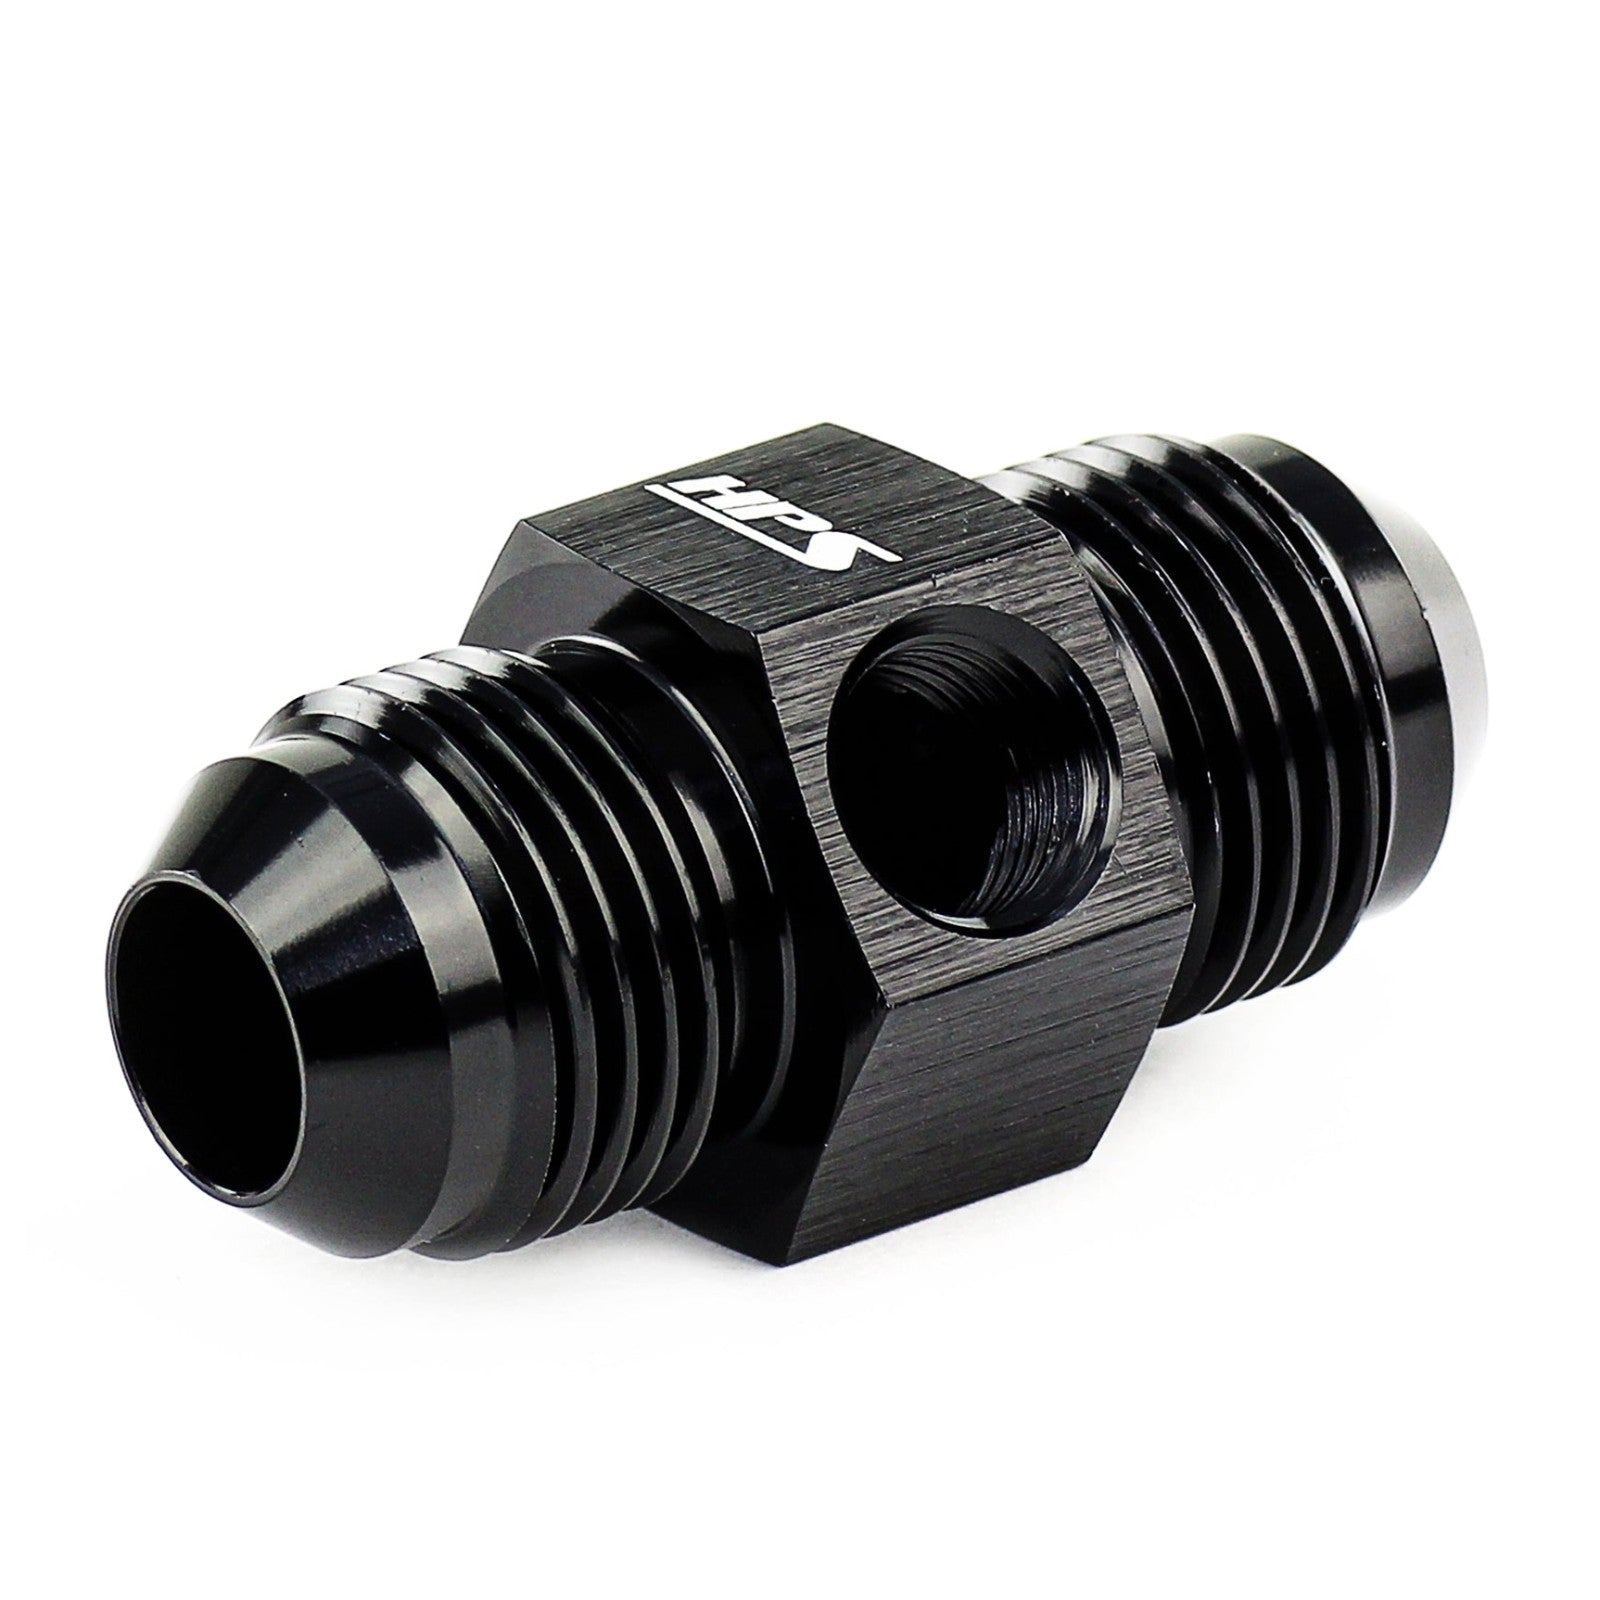 HPS AN Male to Male NPT Adapter (Side Port) Fitting [Tee] [AN -3] (Aluminum, Black)